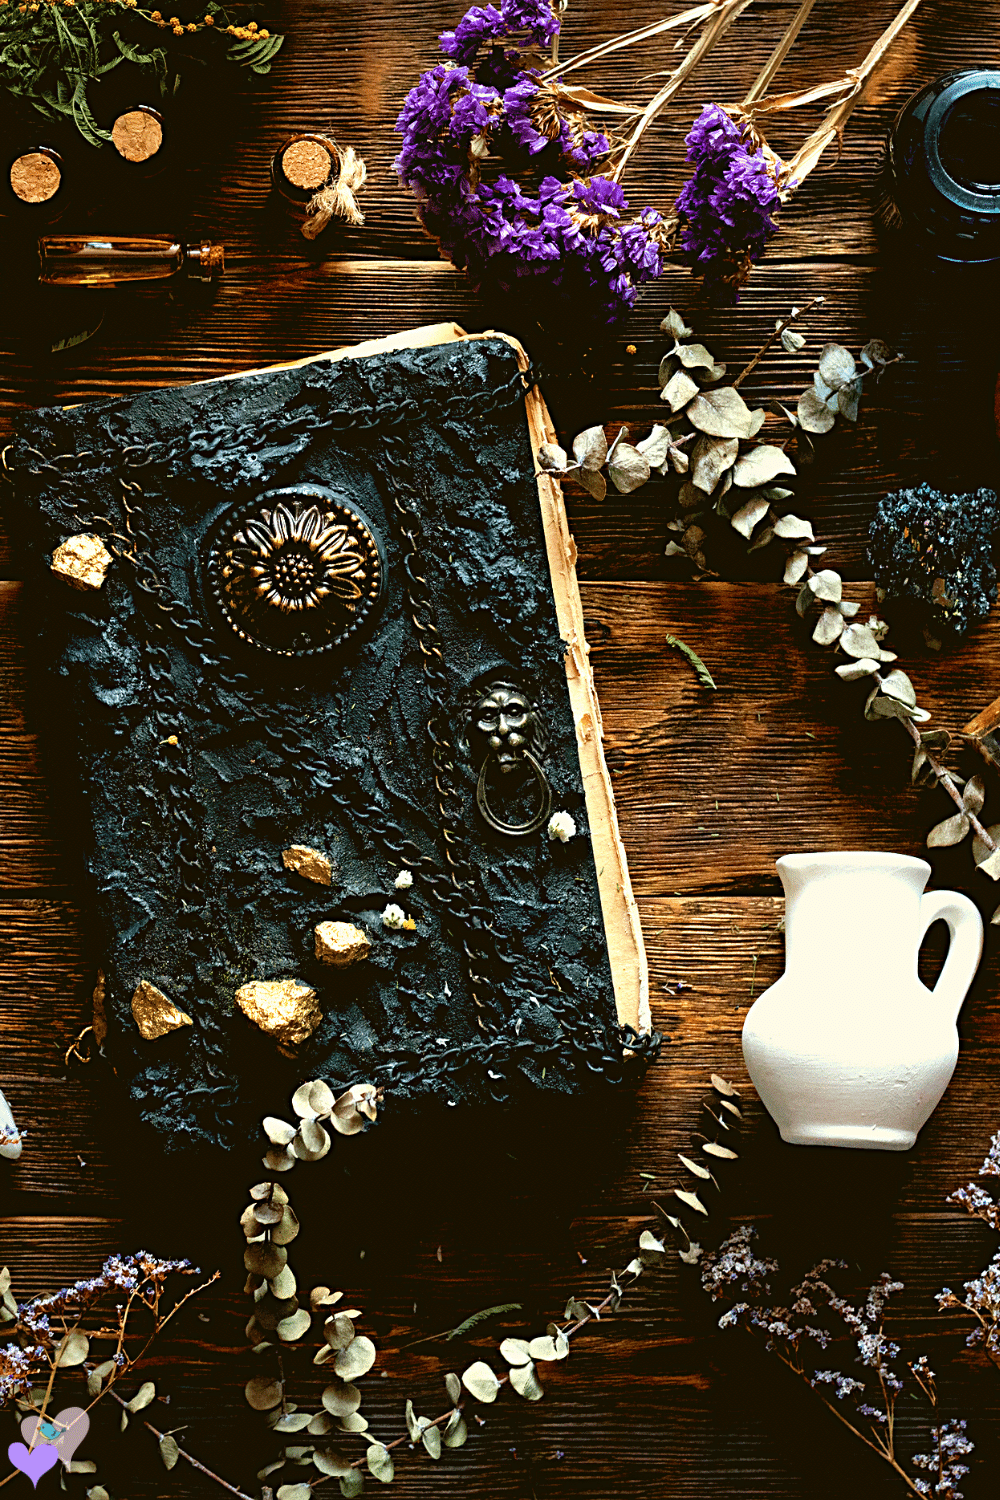 witches table filled with magic spell books, potions and herbs